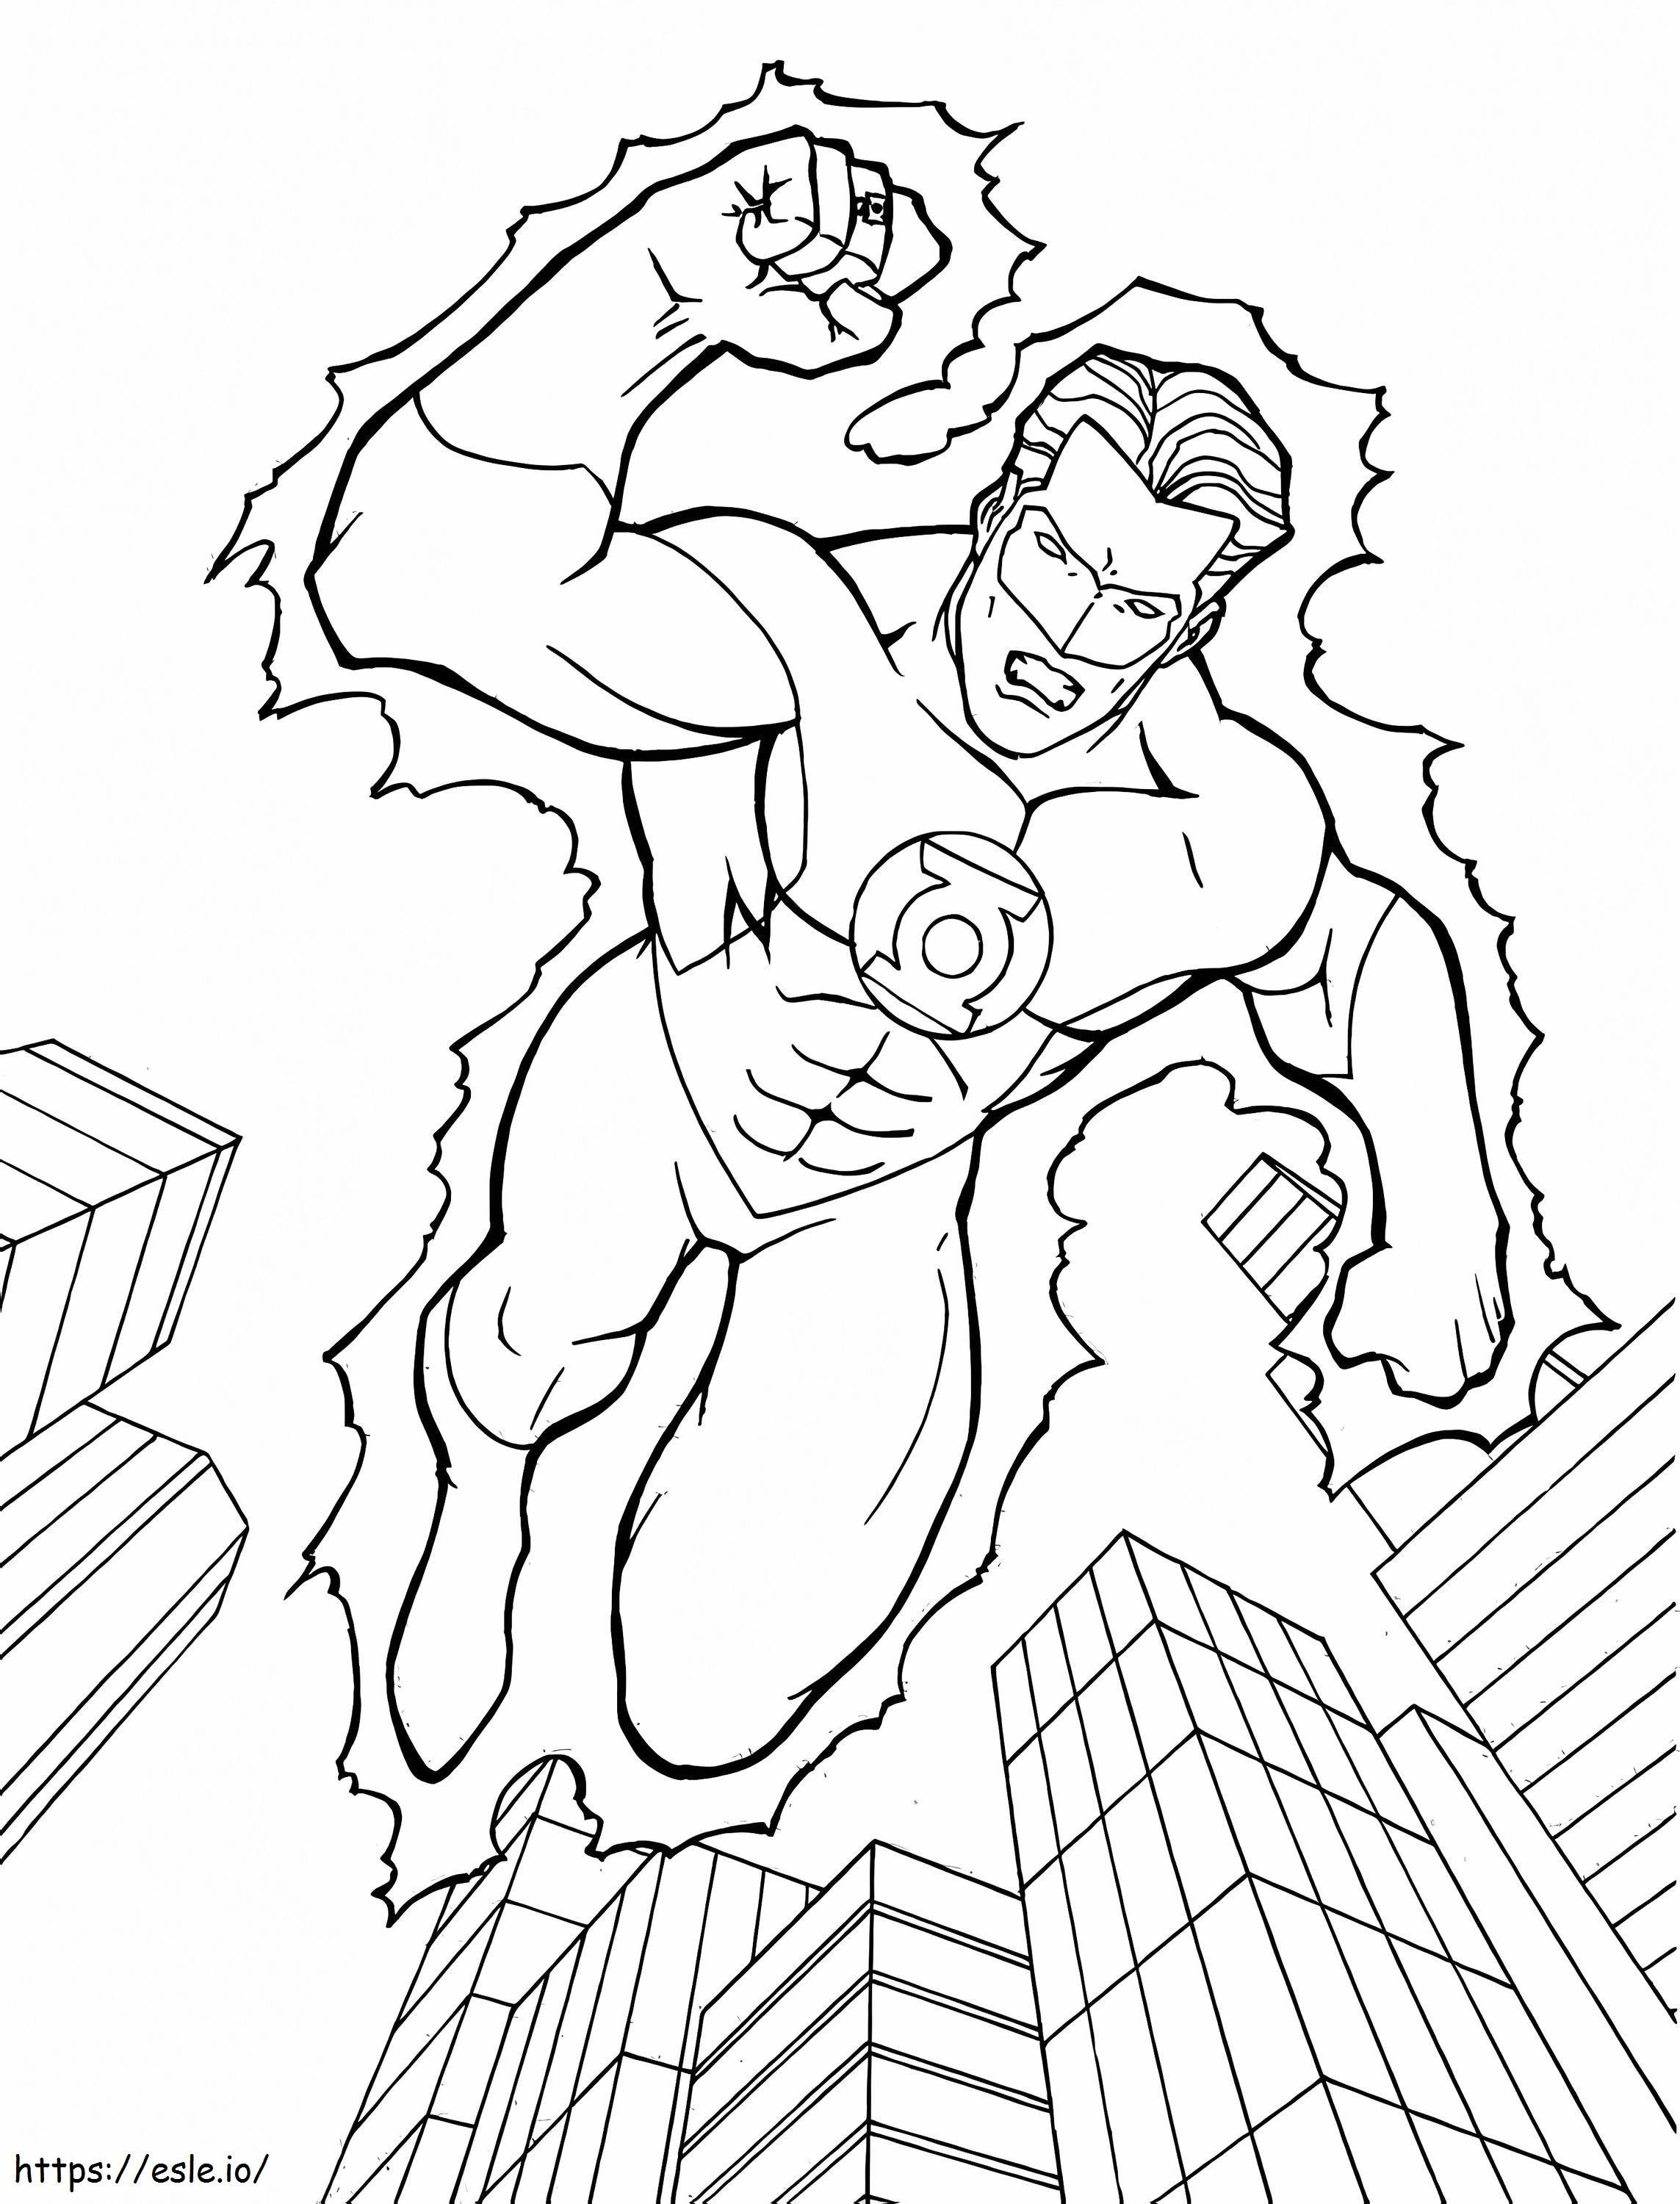 Flying Green Lantern coloring page